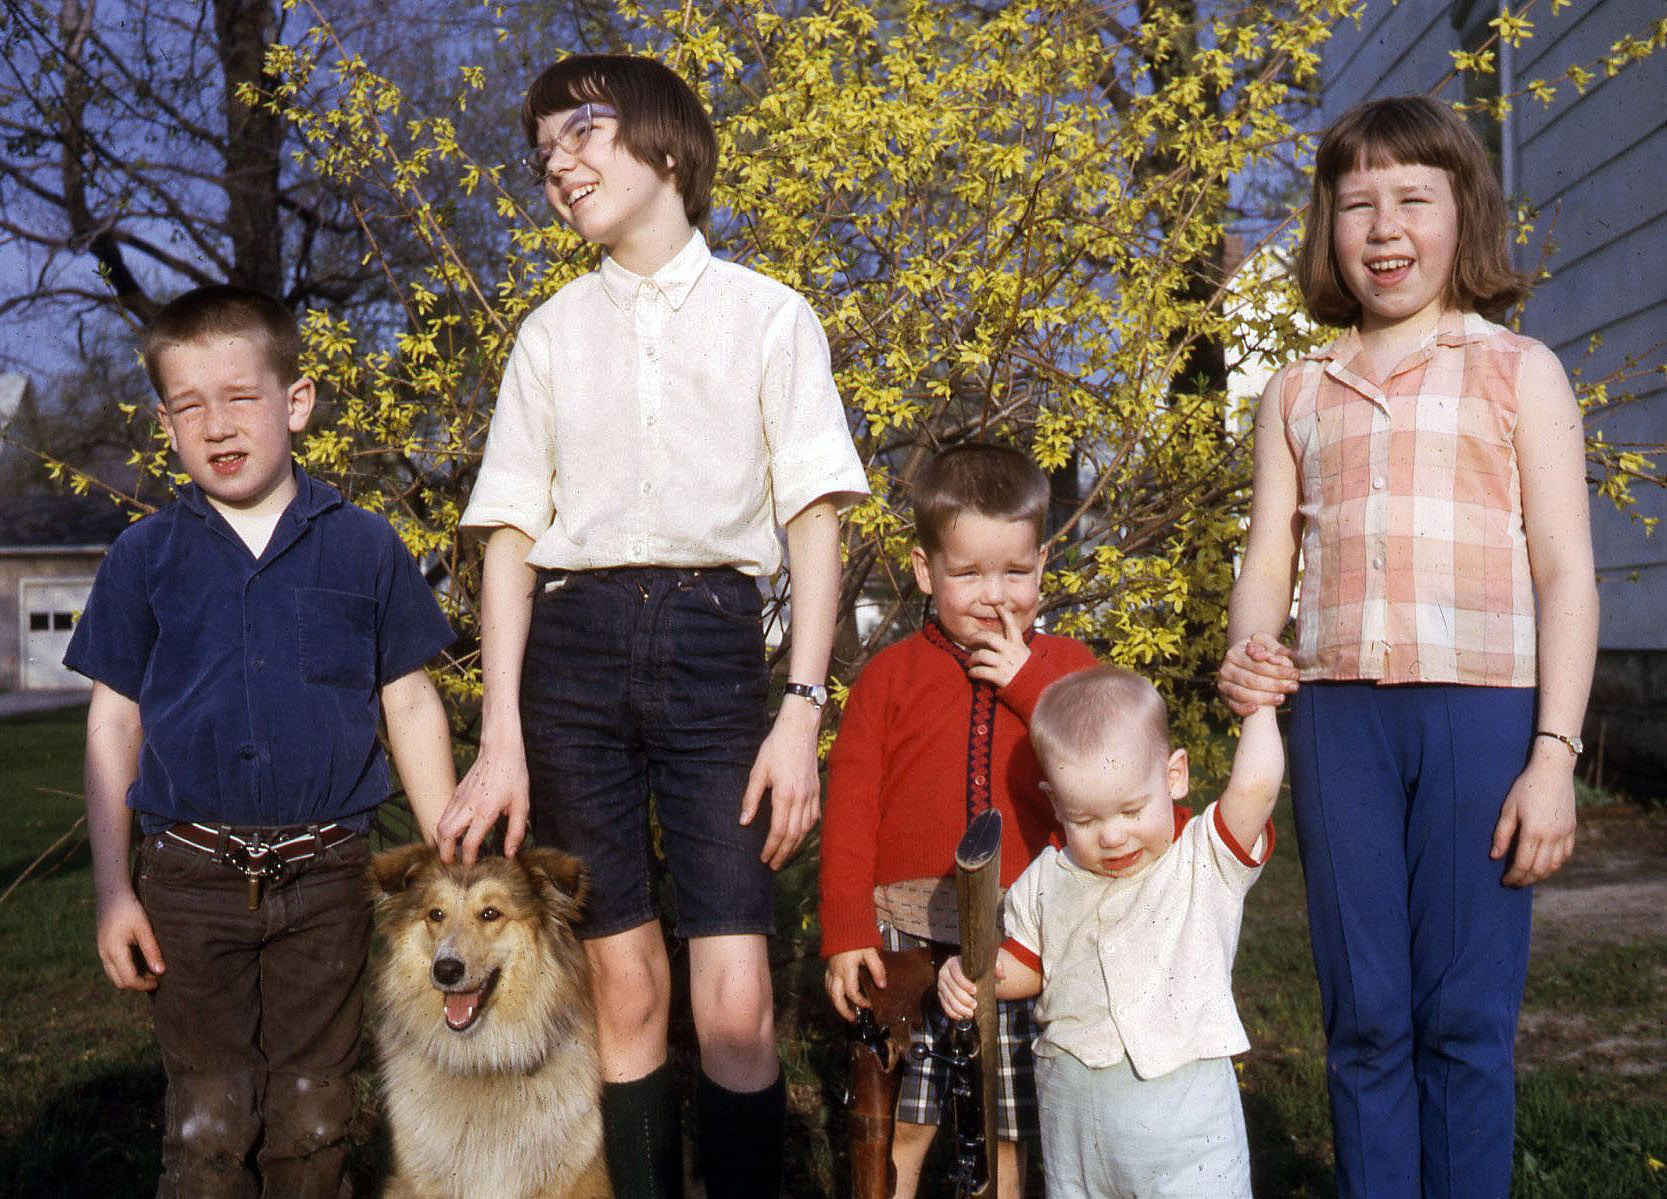 All five kids plus Tippy the wonder dog in Rochester, Indiana. Kodachrome slide. View full size.